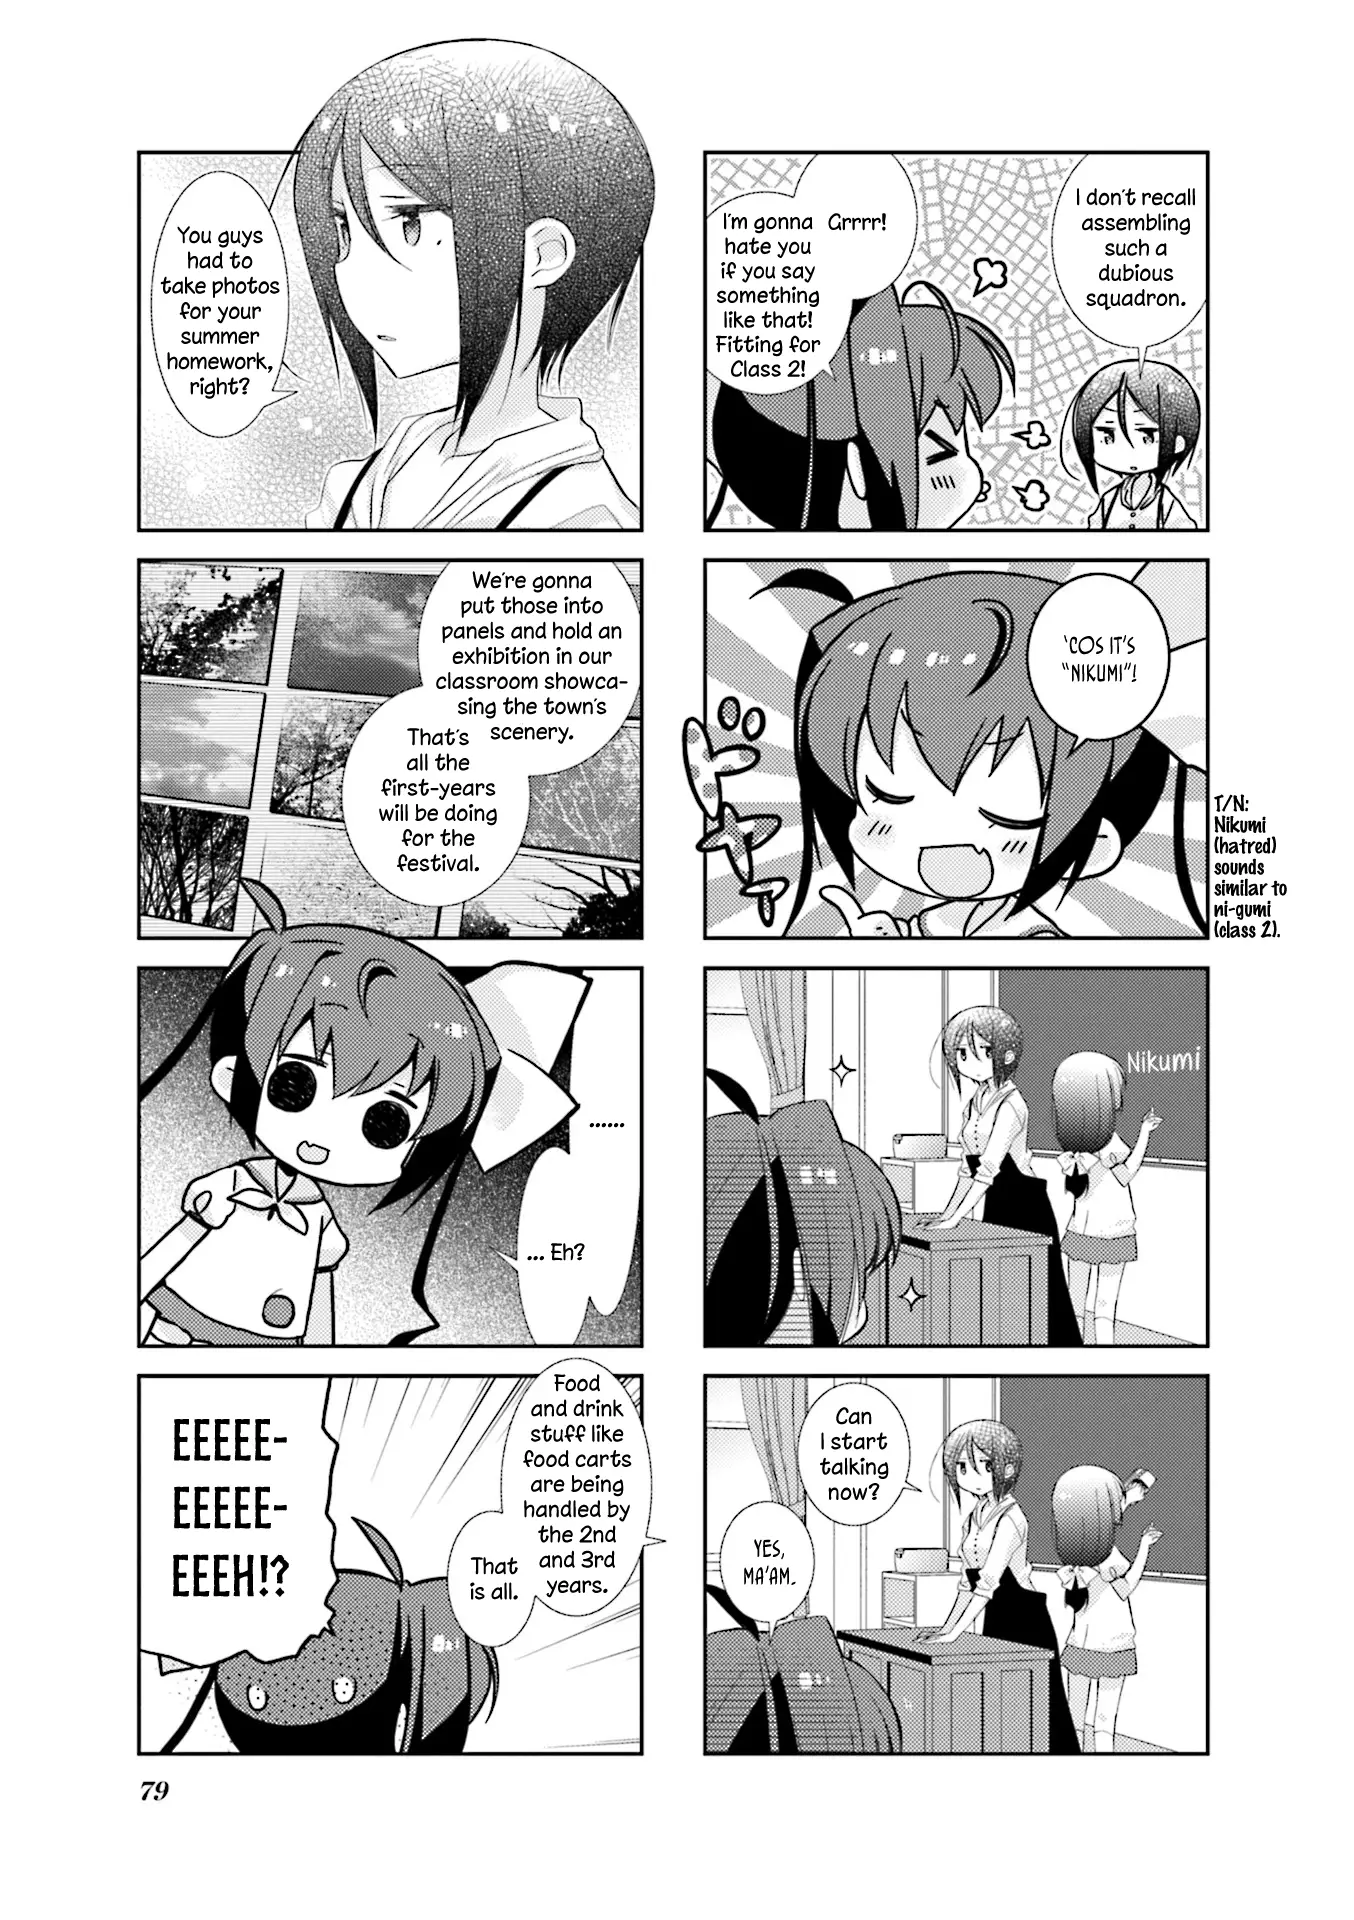 Slow Start - 70 page 3-82bf6487